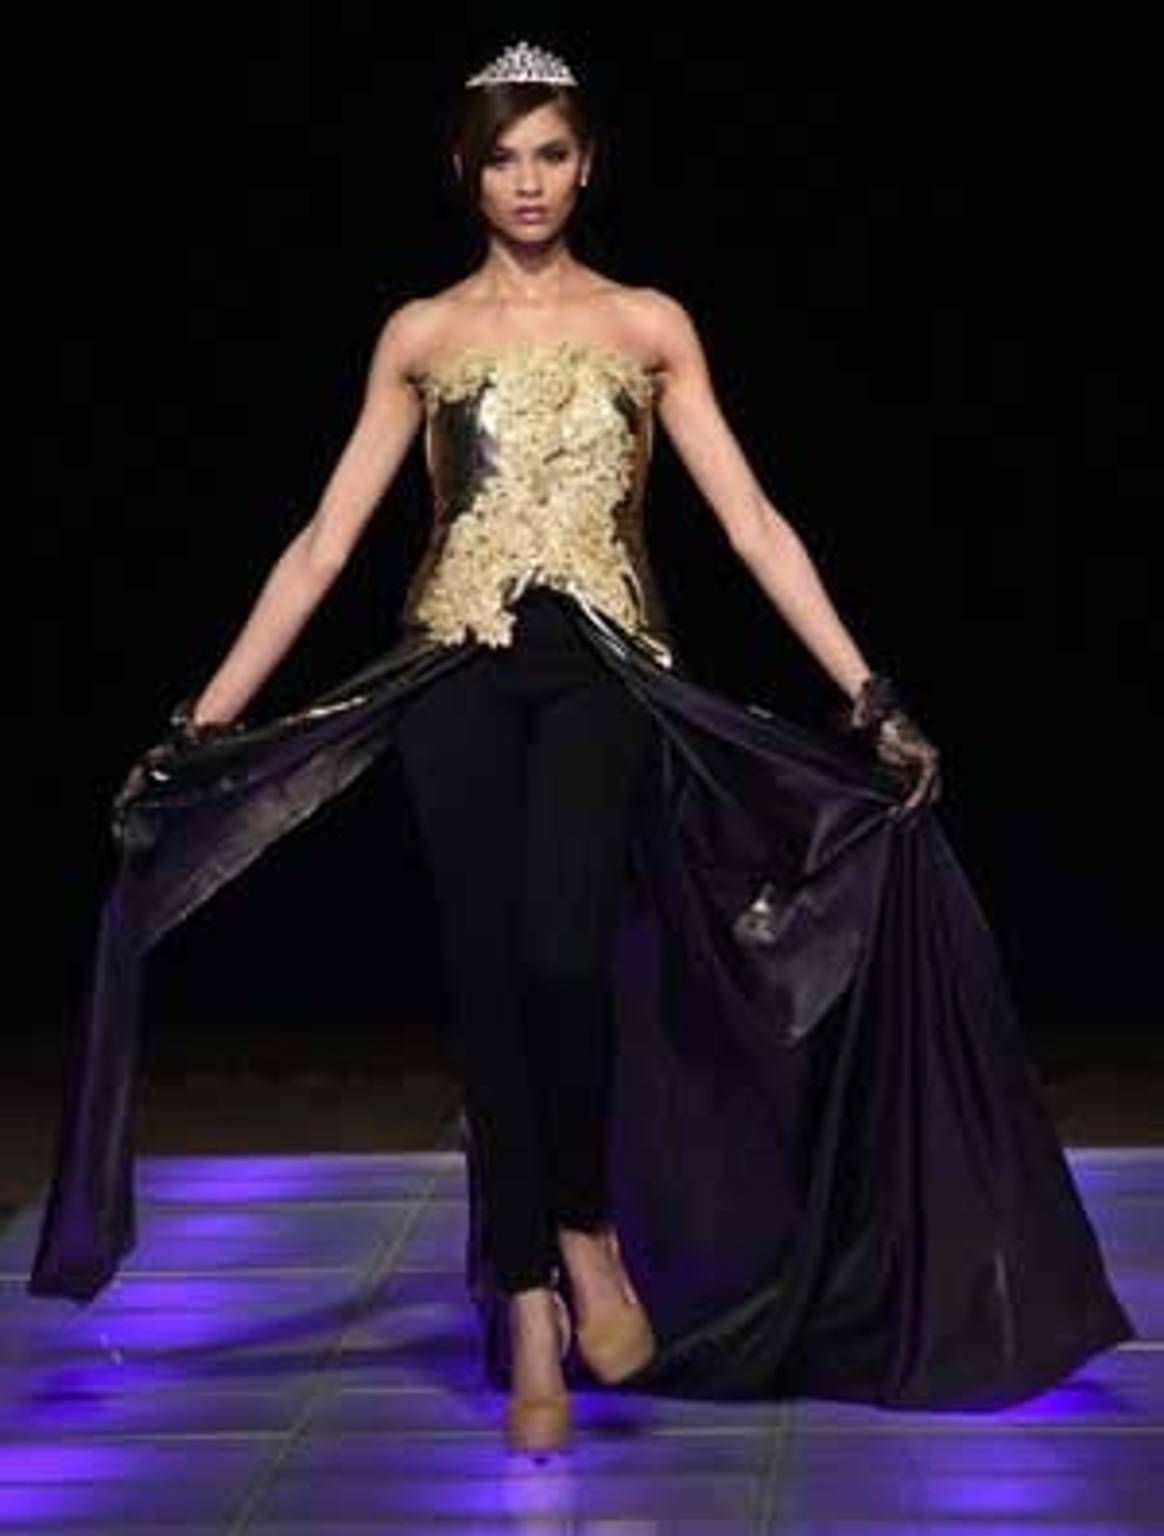 Elegant Designs by Elcy Cortorreal to Grace the Couture Fashion Week Runway